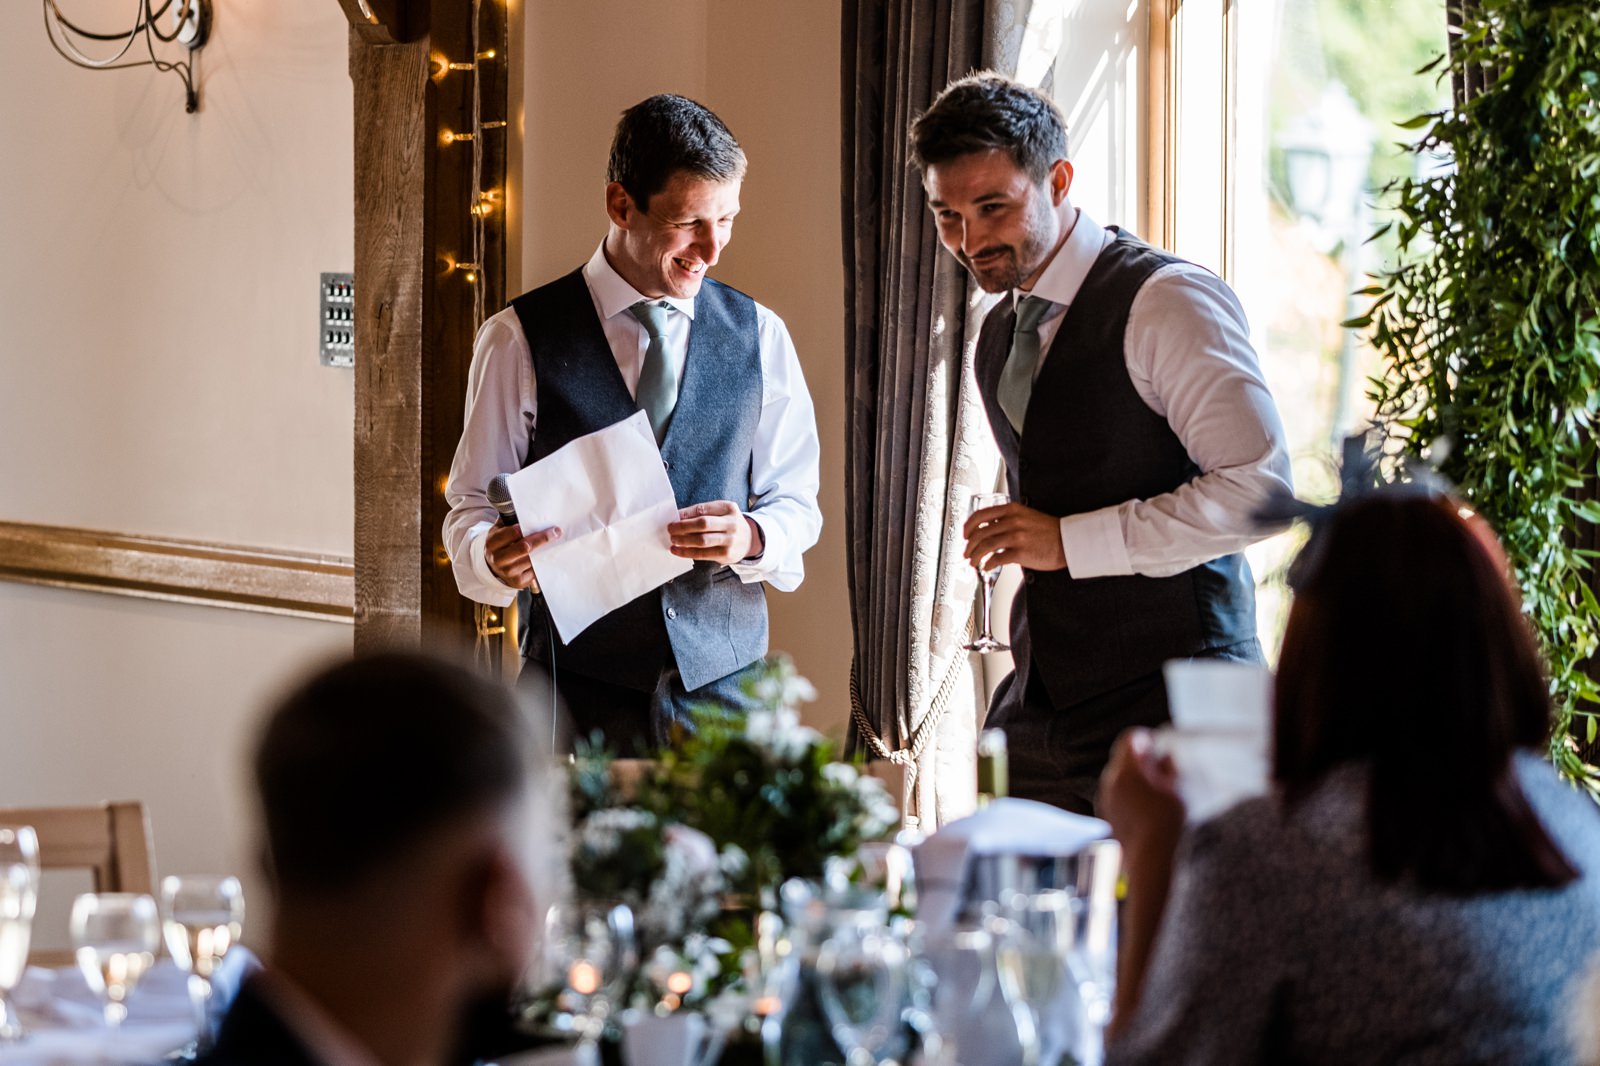 Wedding speeches at King Arthur Hotel, South Wales